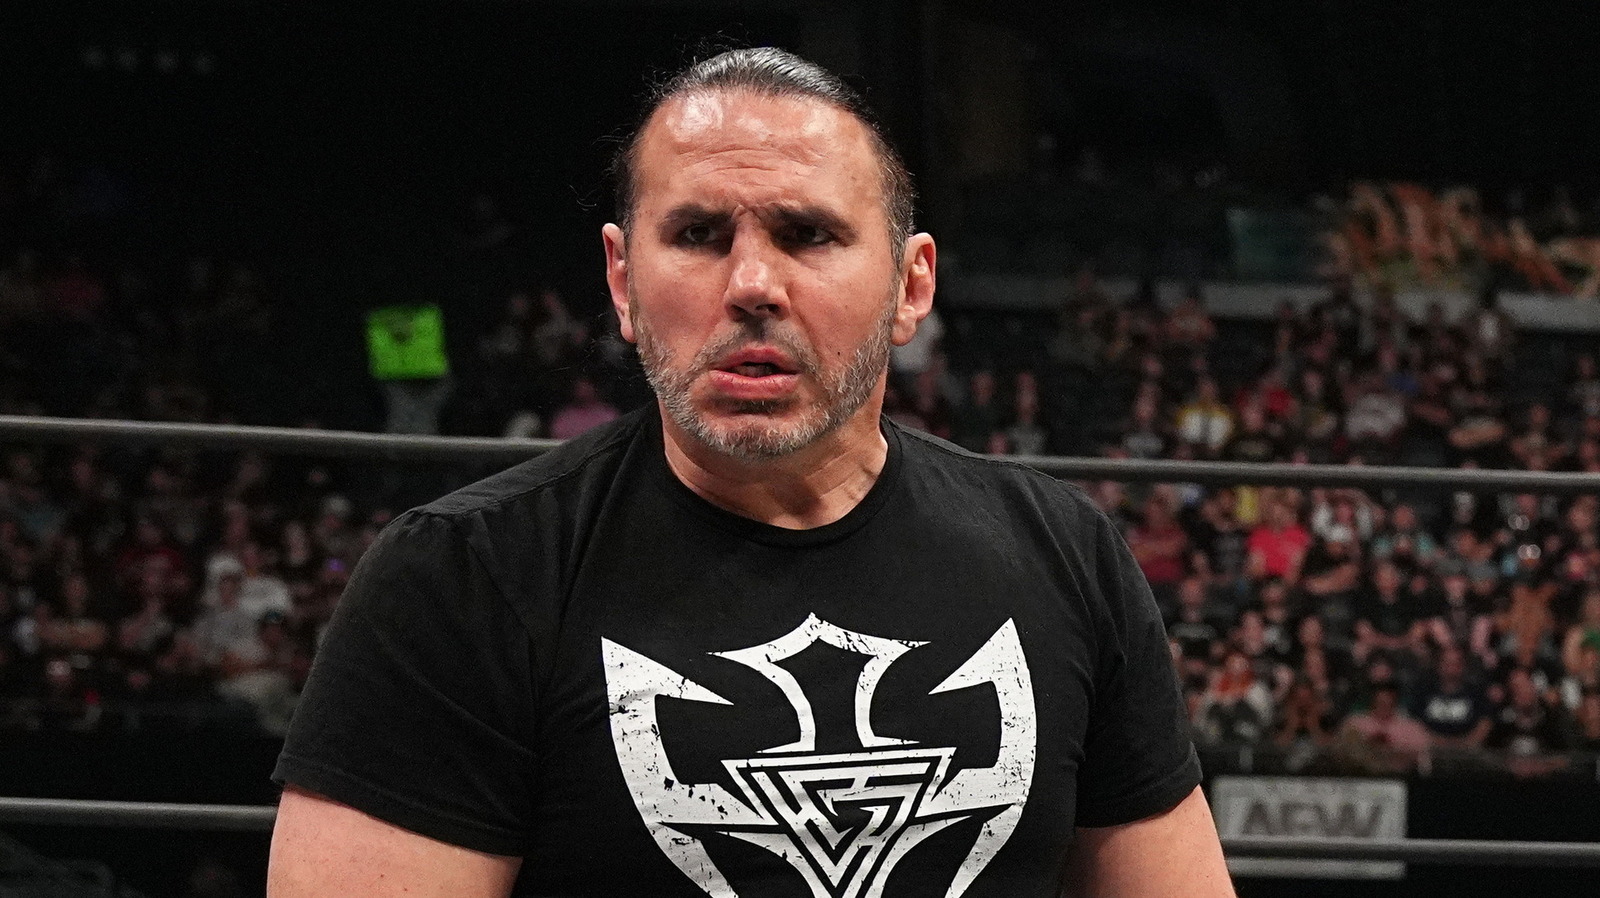 AEW's Matt Hardy To Jim Cornette: 'I Used To Have Massive Respect For You'